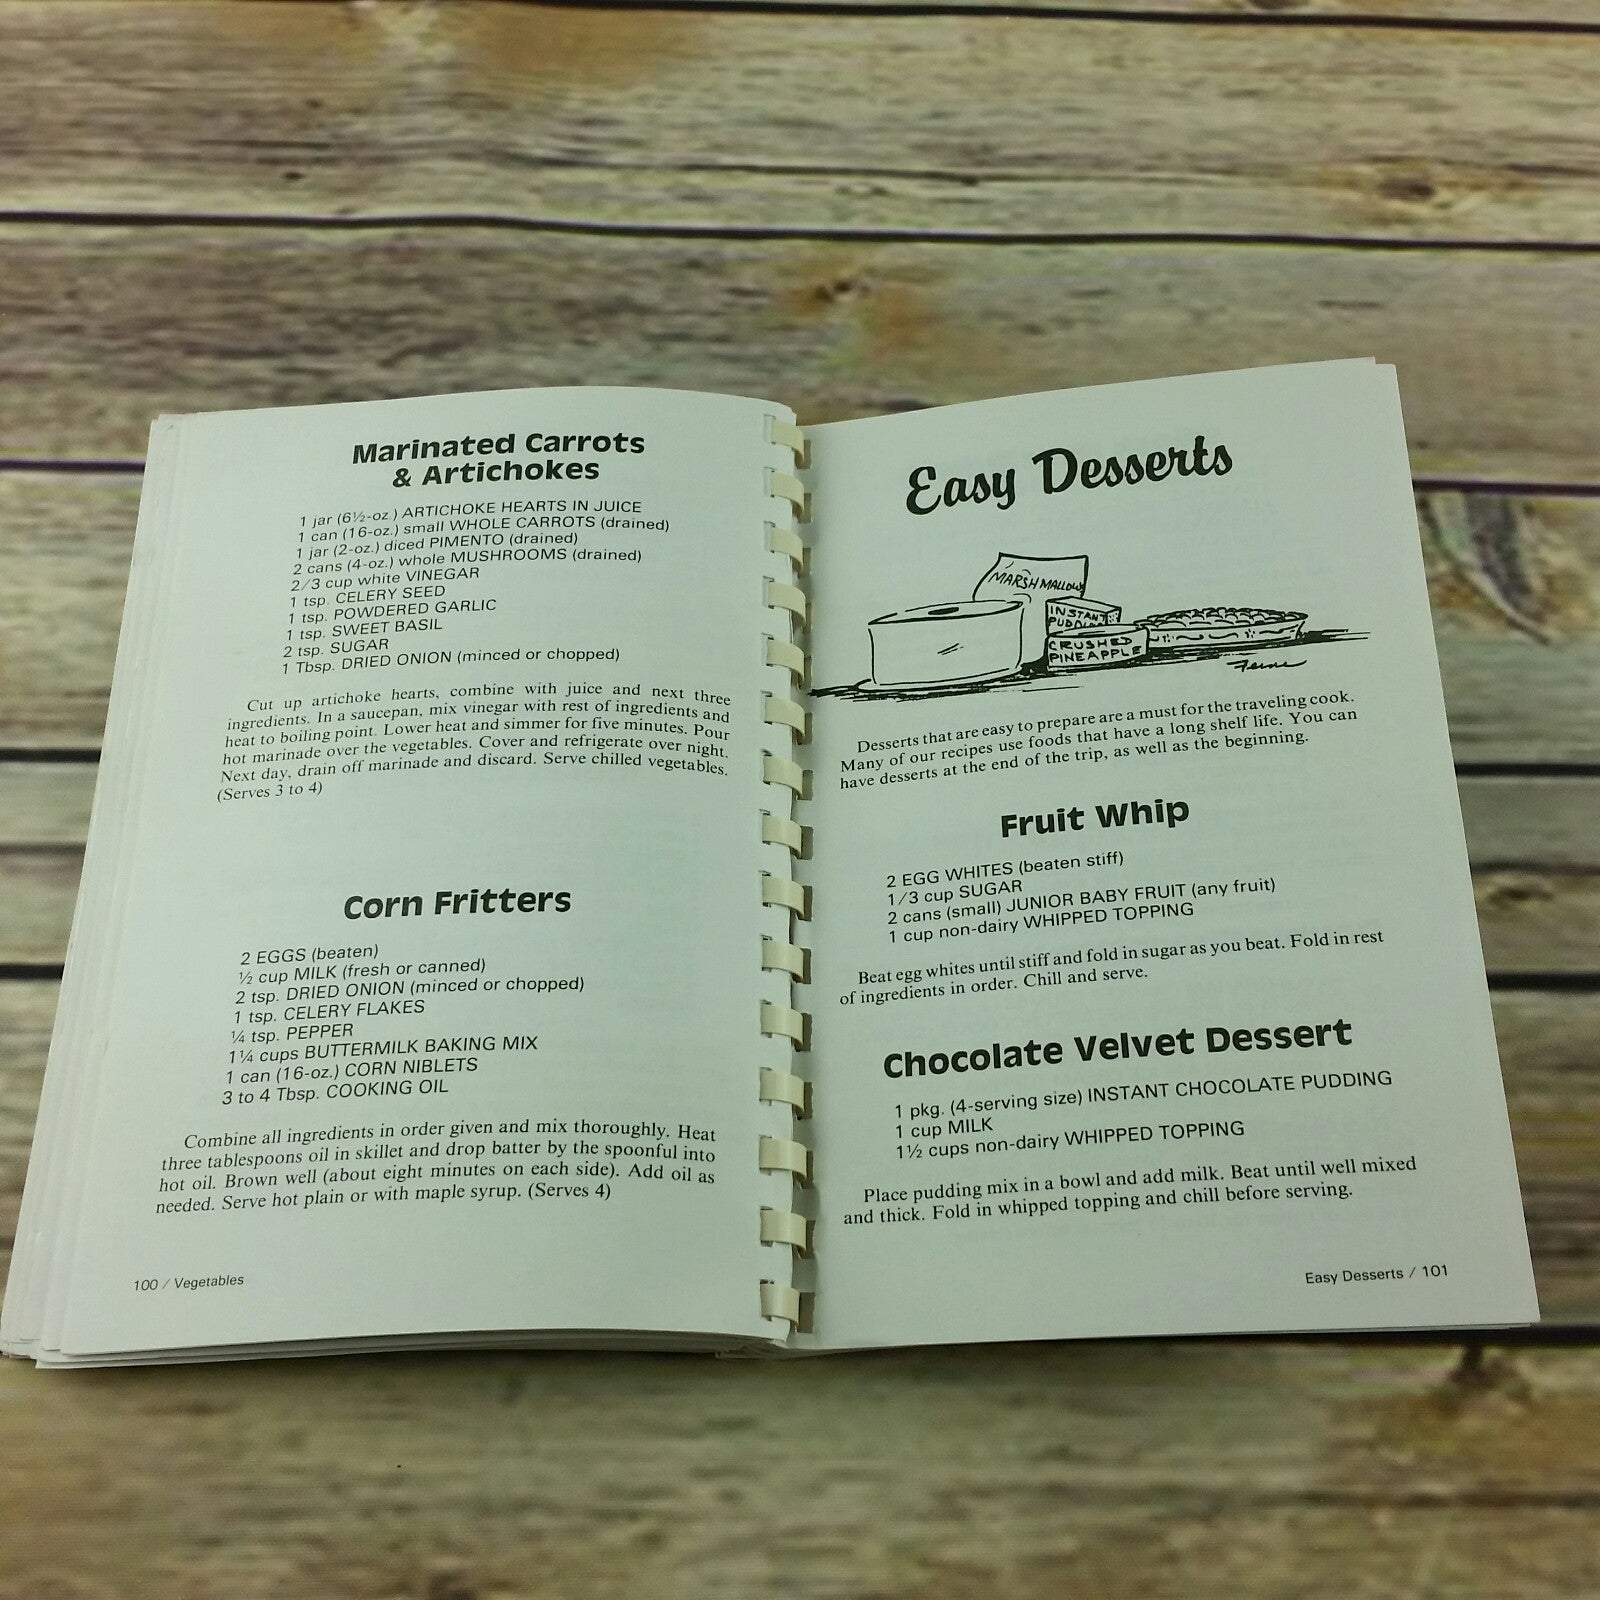 Travel Cookbook Easy RV Recipes For the Traveling Cook Spiral Bound Ferne Holmes 1997 Spiral Bound - At Grandma's Table